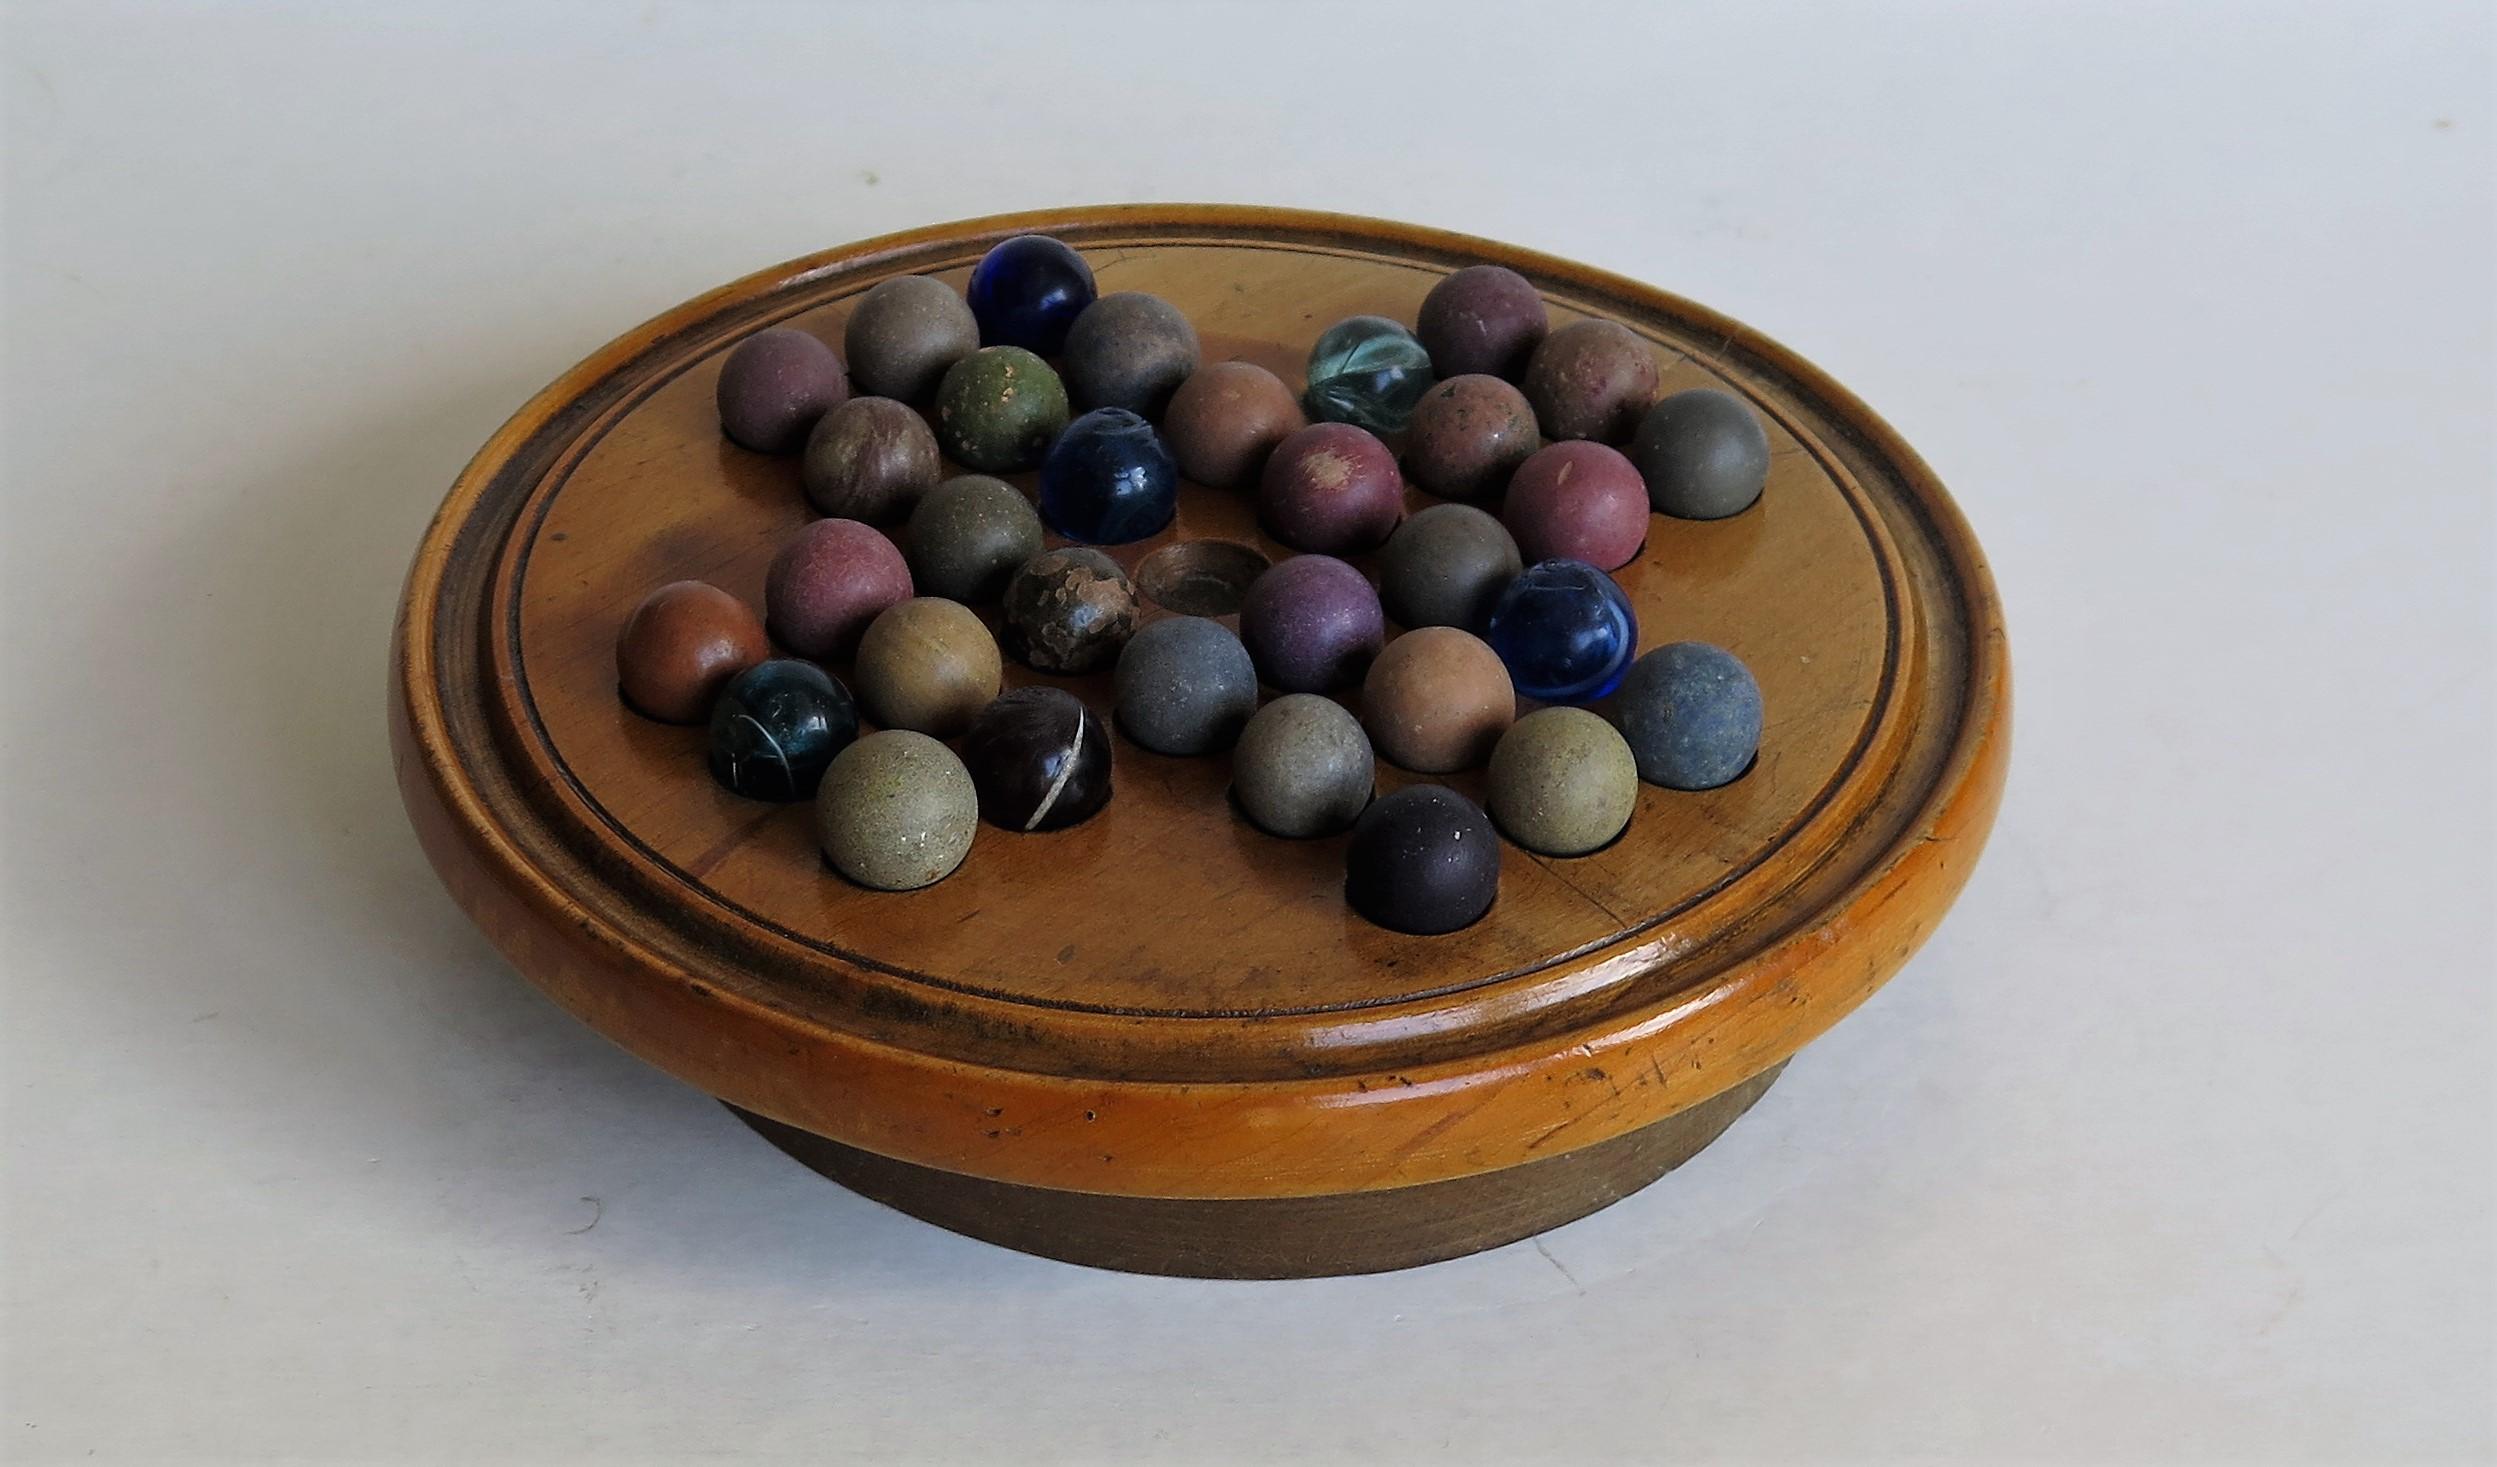 Victorian 19th Century Travelling Marble Solitaire Board Game, with 32 Handmade Marbles